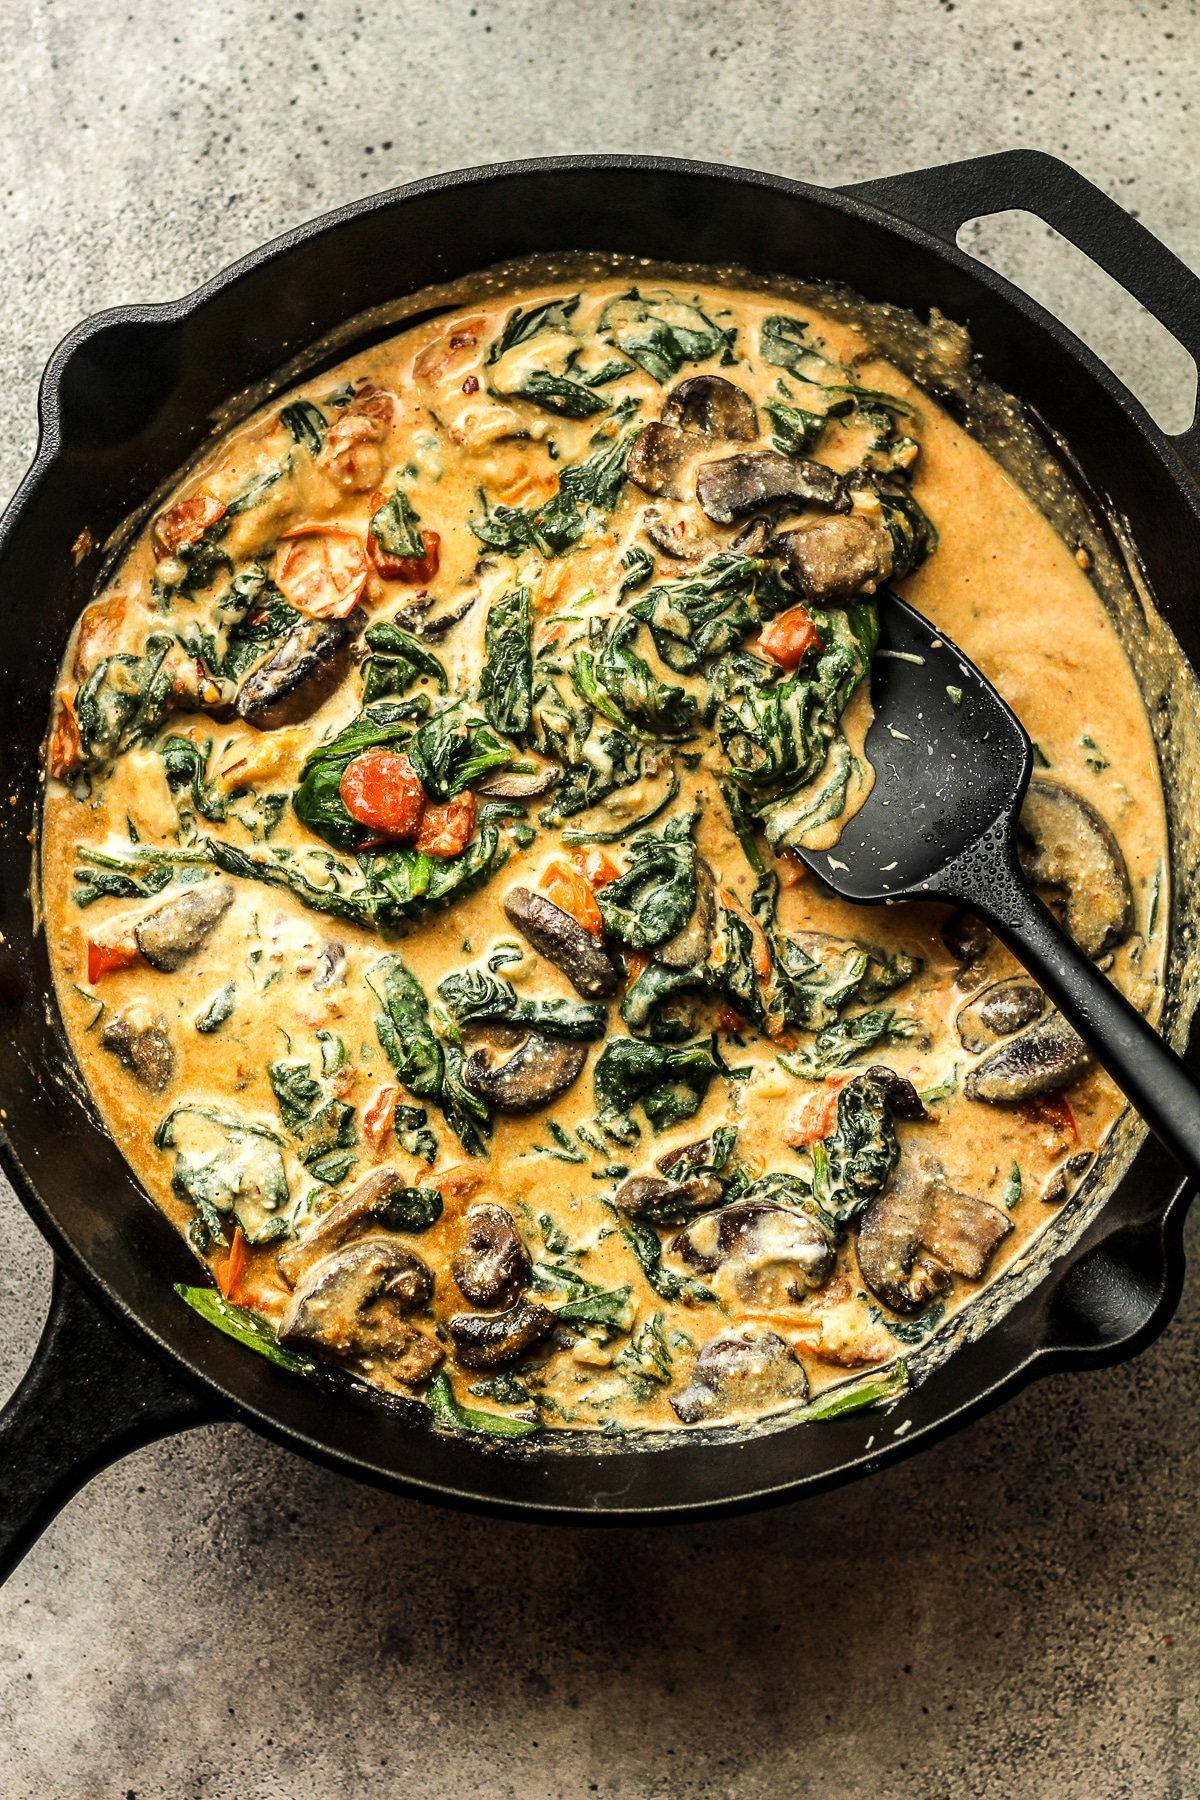 A skillet of the Florentine sauce.